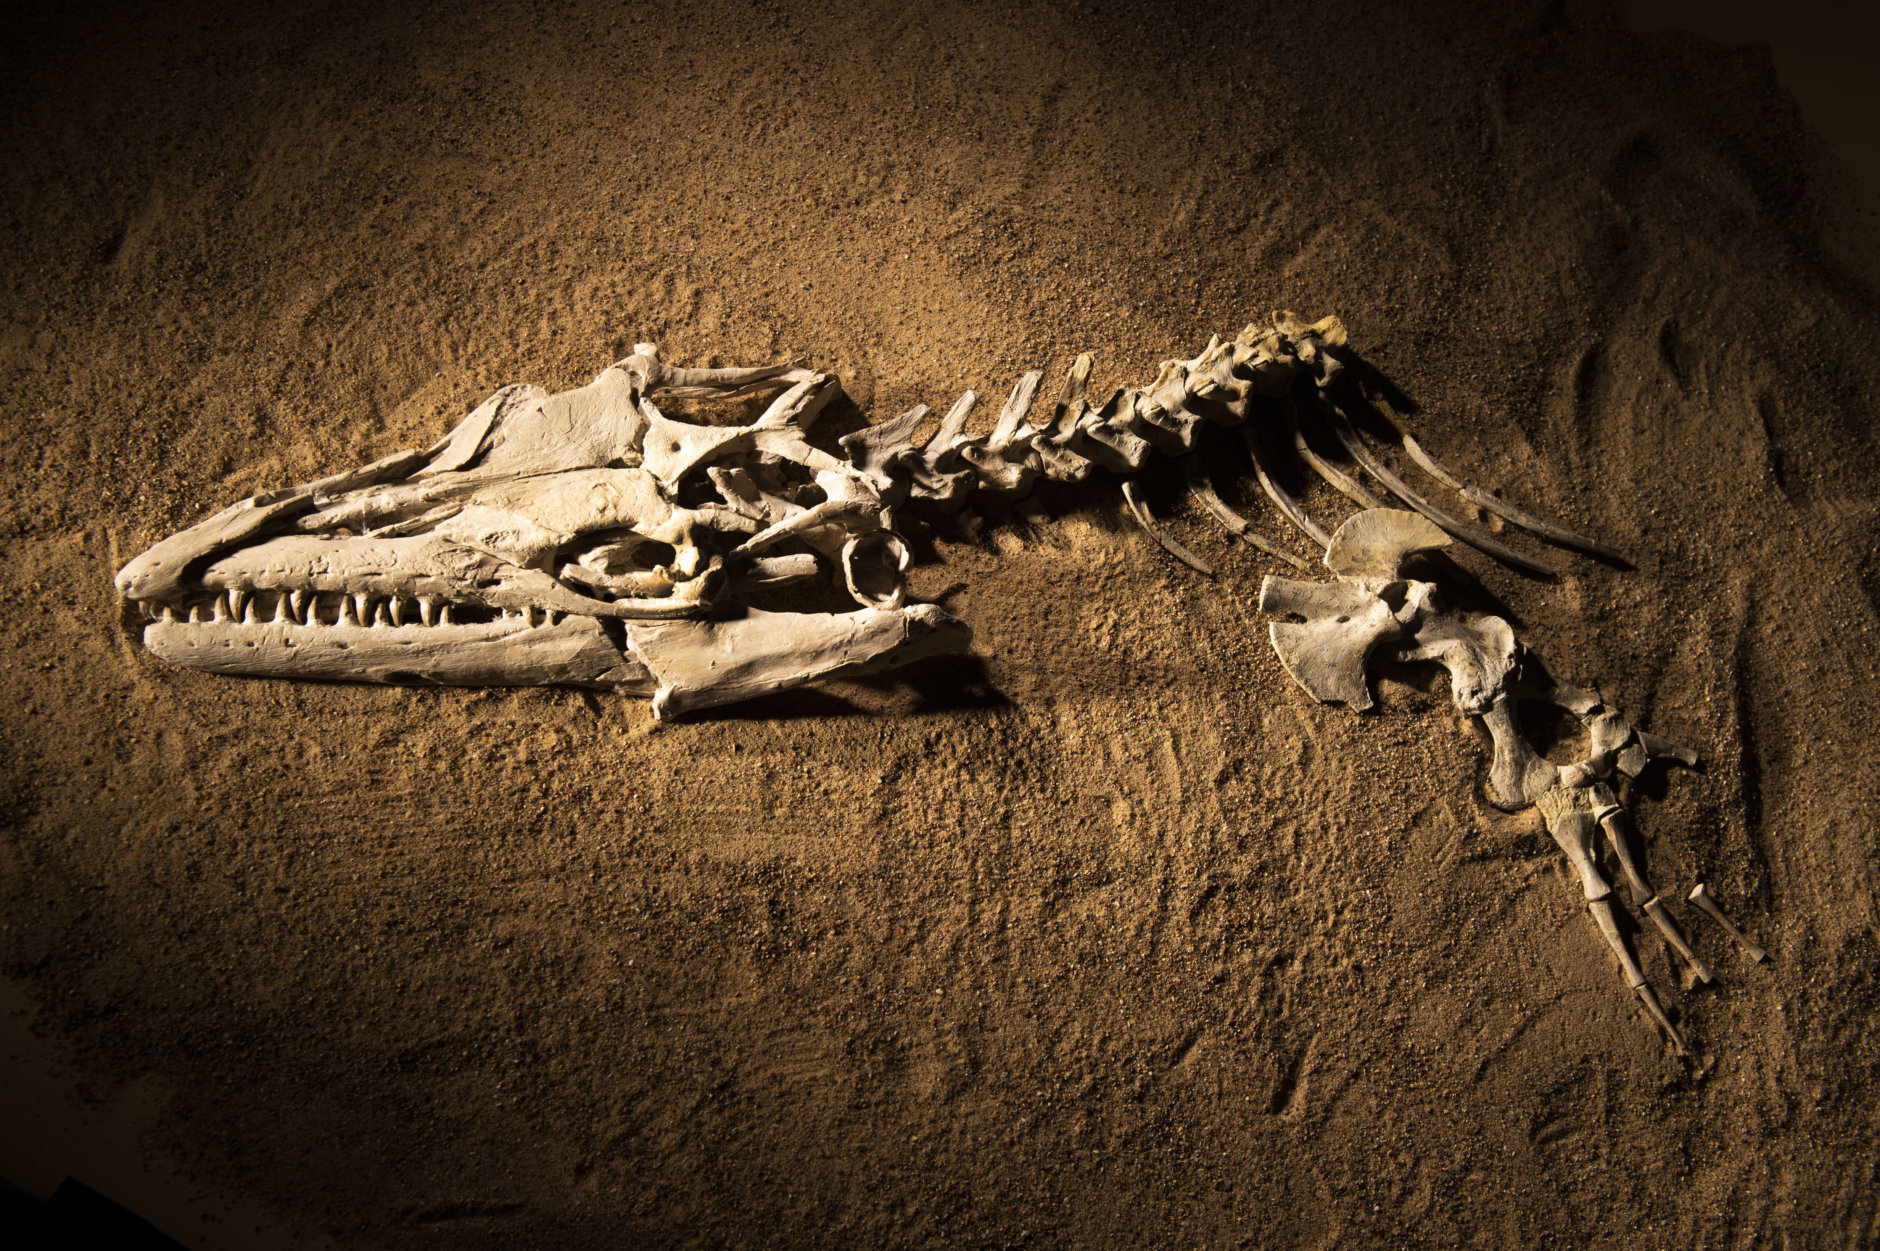 The fossil skull and partial skeleton of mosasaur Angolasaurus bocagei excavated from Angola’s costal cliffs for display in “Sea Monsters Unearthed.” (Hillsman S. Jackson, Southern Methodist University)